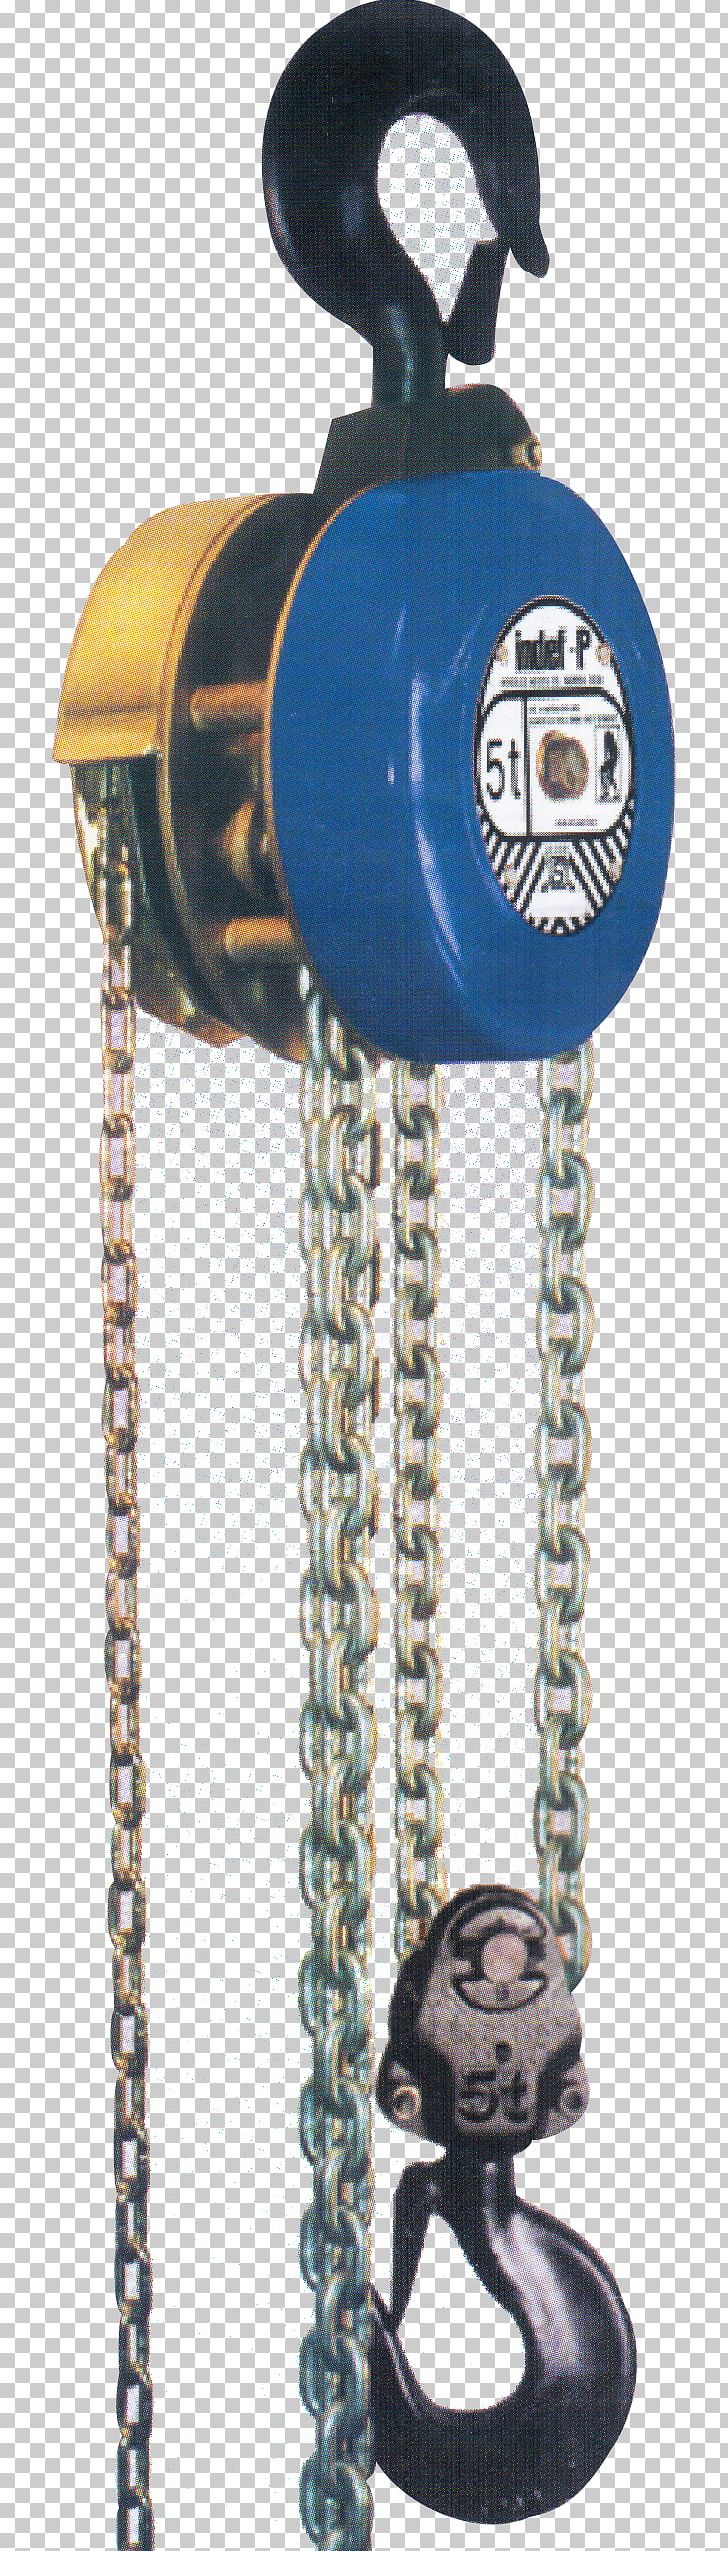 India Hoist Pulley Block And Tackle PNG, Clipart, Block, Block And Tackle, Chain, Company, Crane Free PNG Download